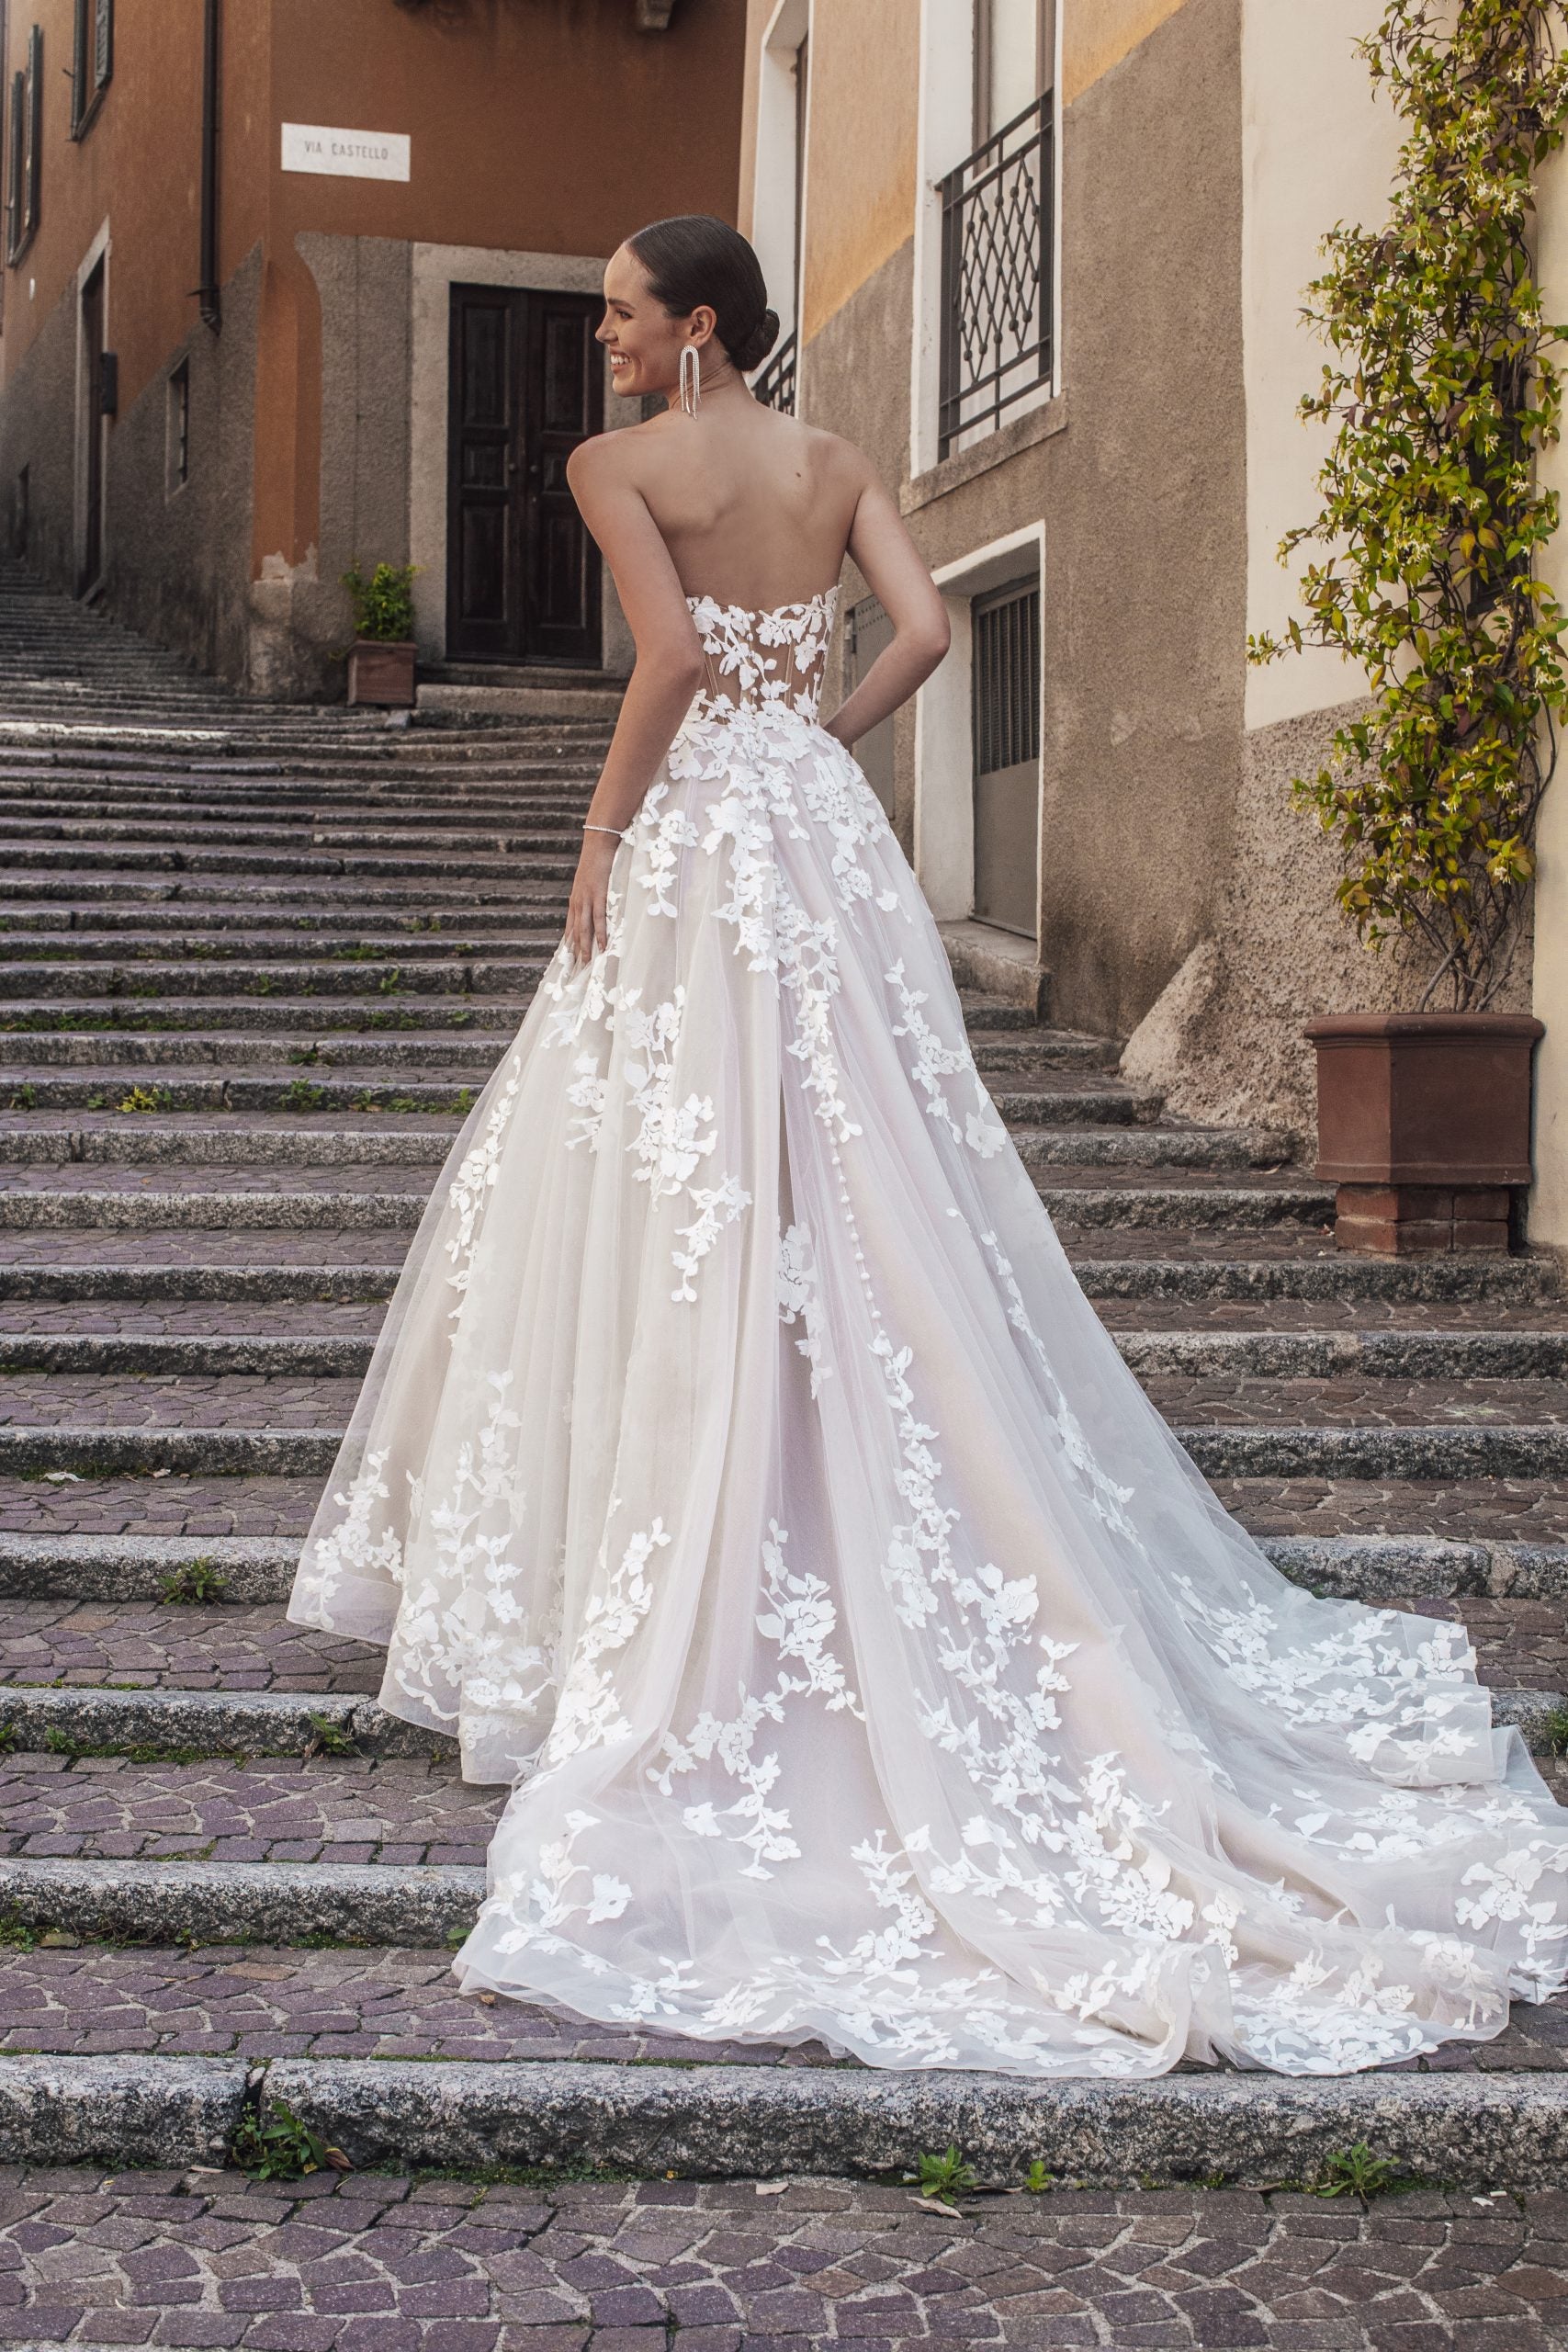 Romantic Floral A-Line Gown by Madison James - Image 2